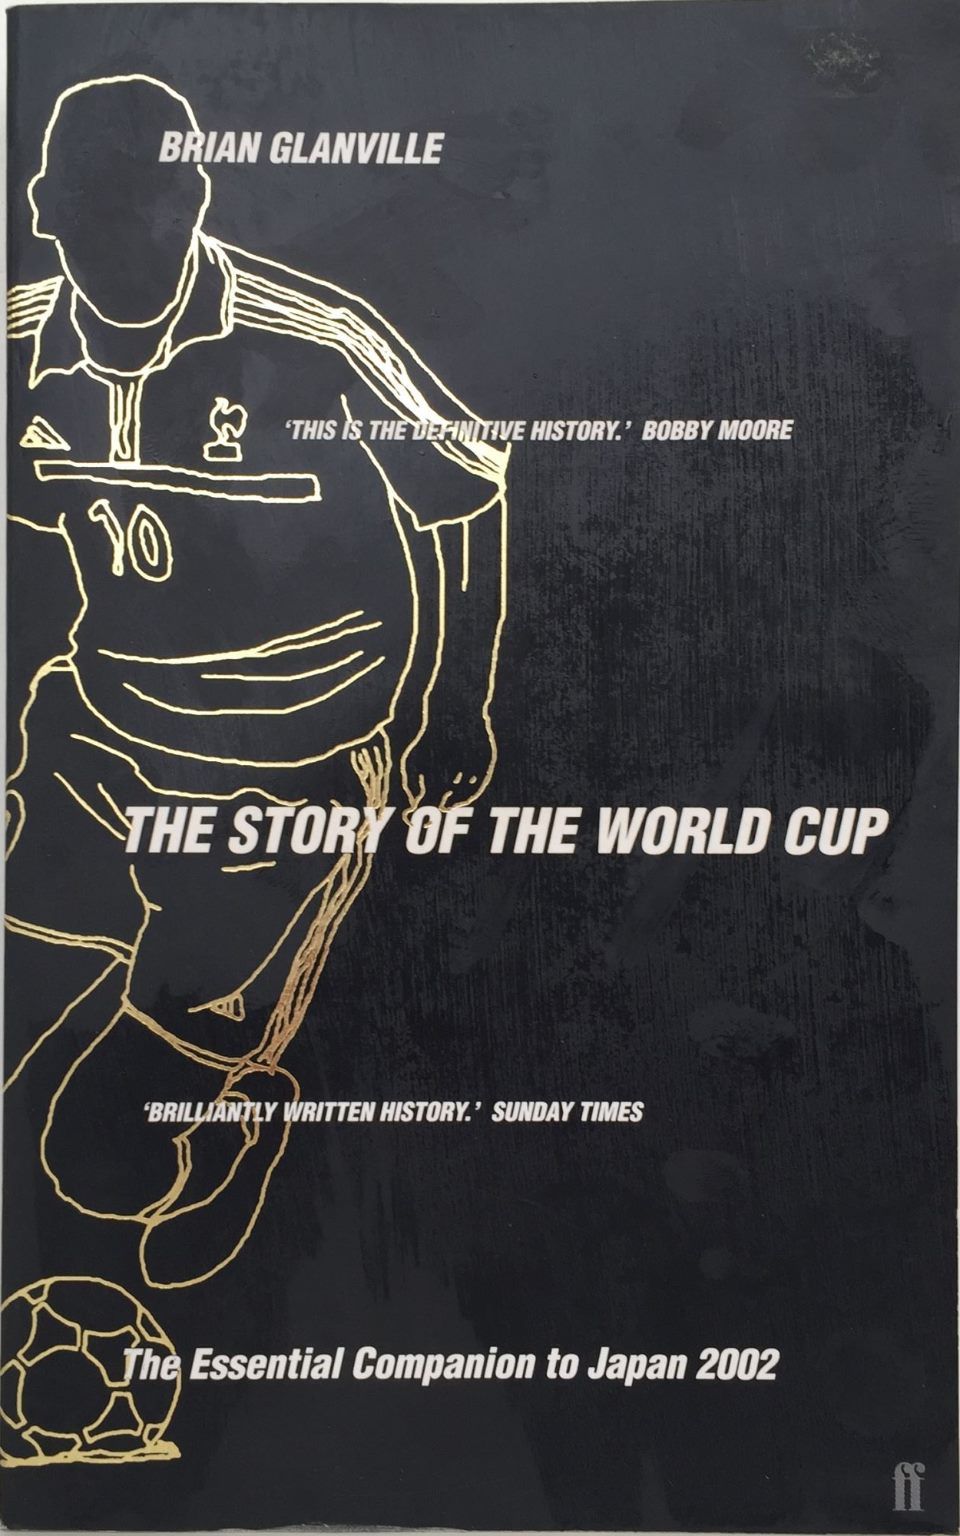 THE STORY OF THE WORLD CUP